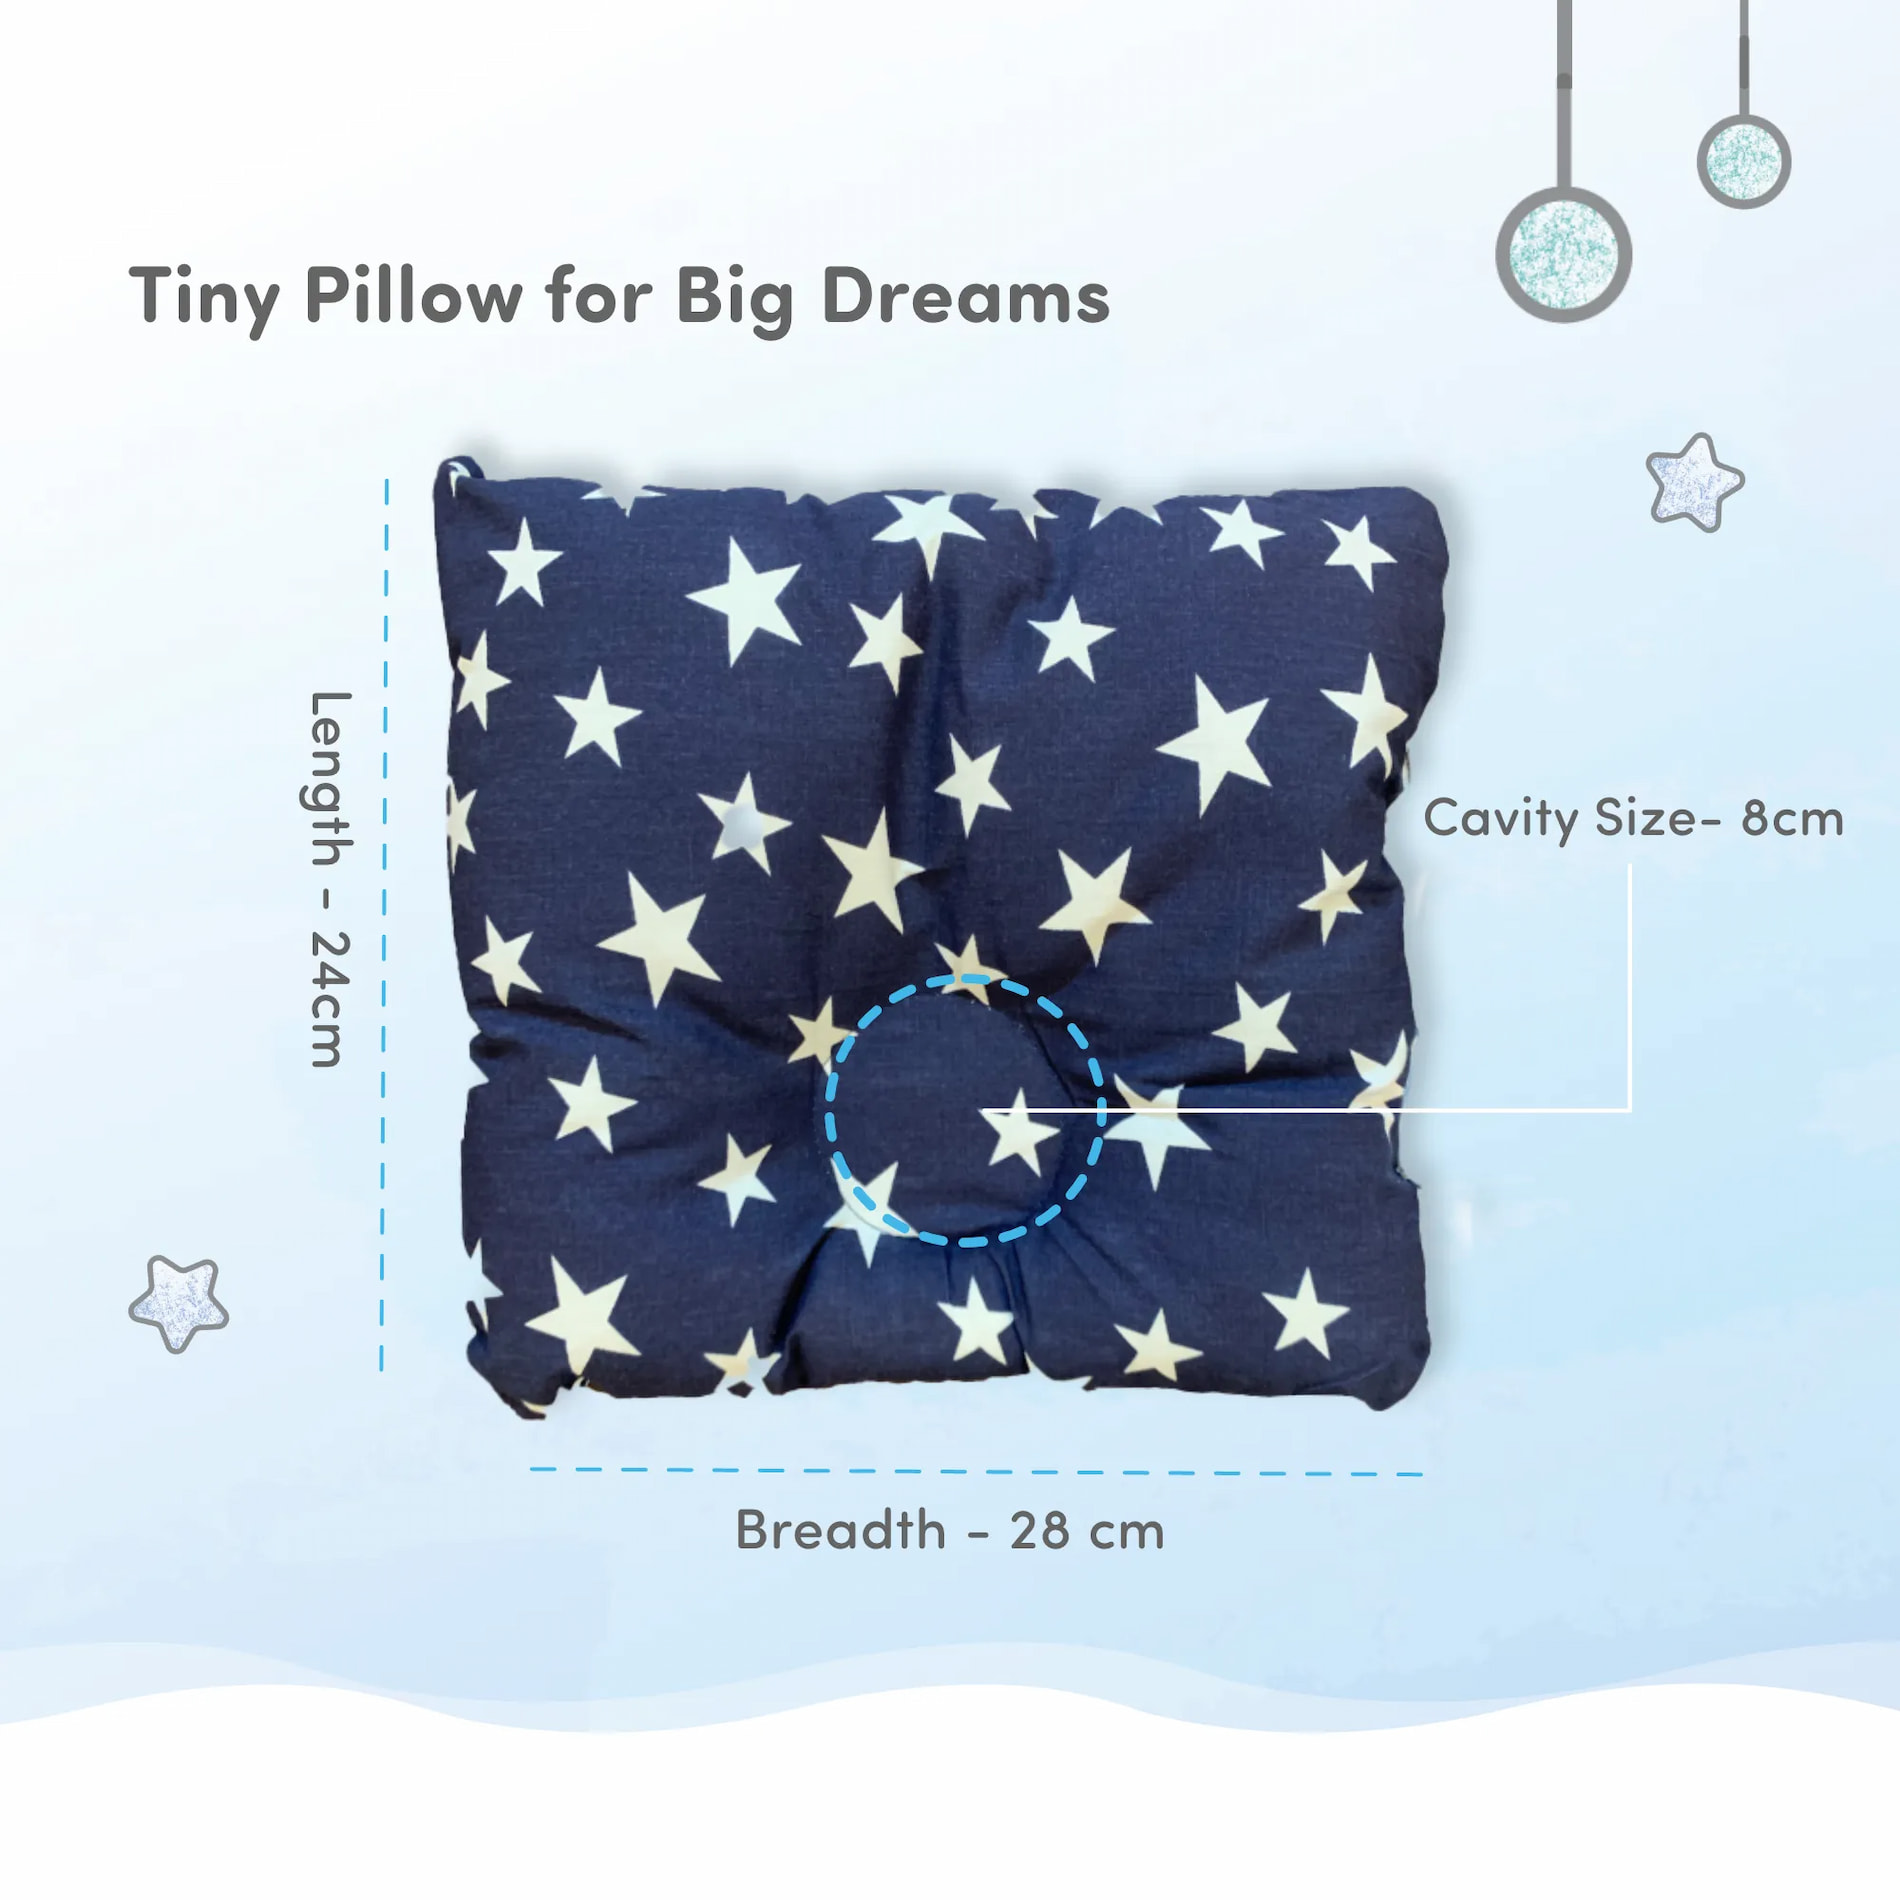 Premium Head Shaping Baby Pillow | Provides Neck Support | Prevents Flat Head Syndrome | Portable & Lightweight | 0-36 Months | Starry Night